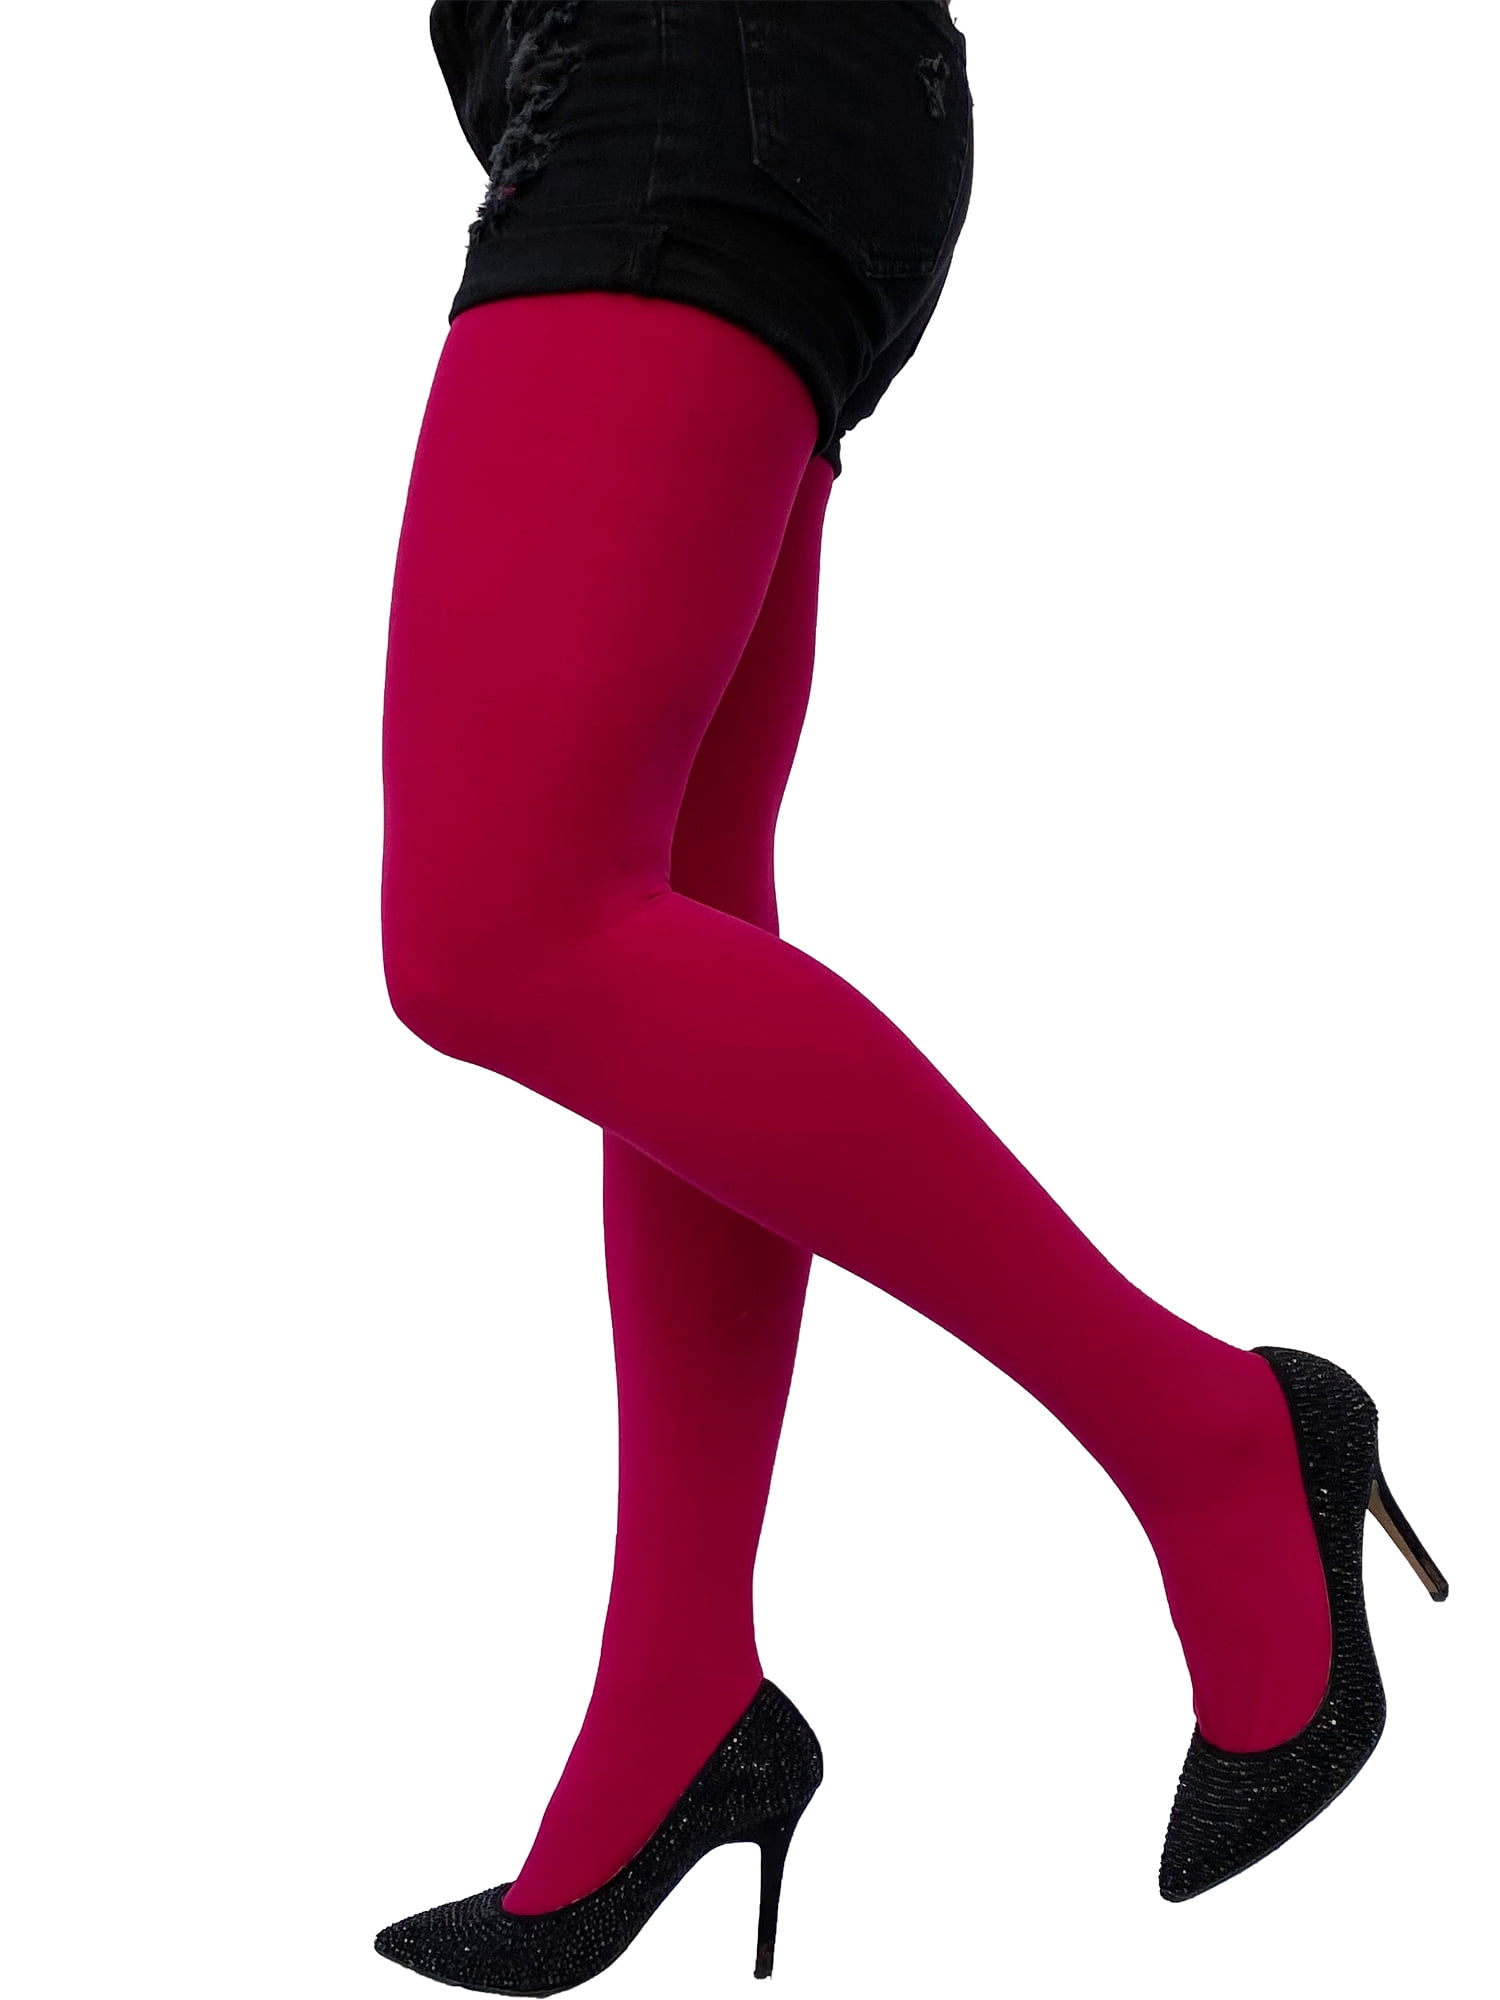 Tights Plus Size Coral Pink for Women, Soft and Durable Solid